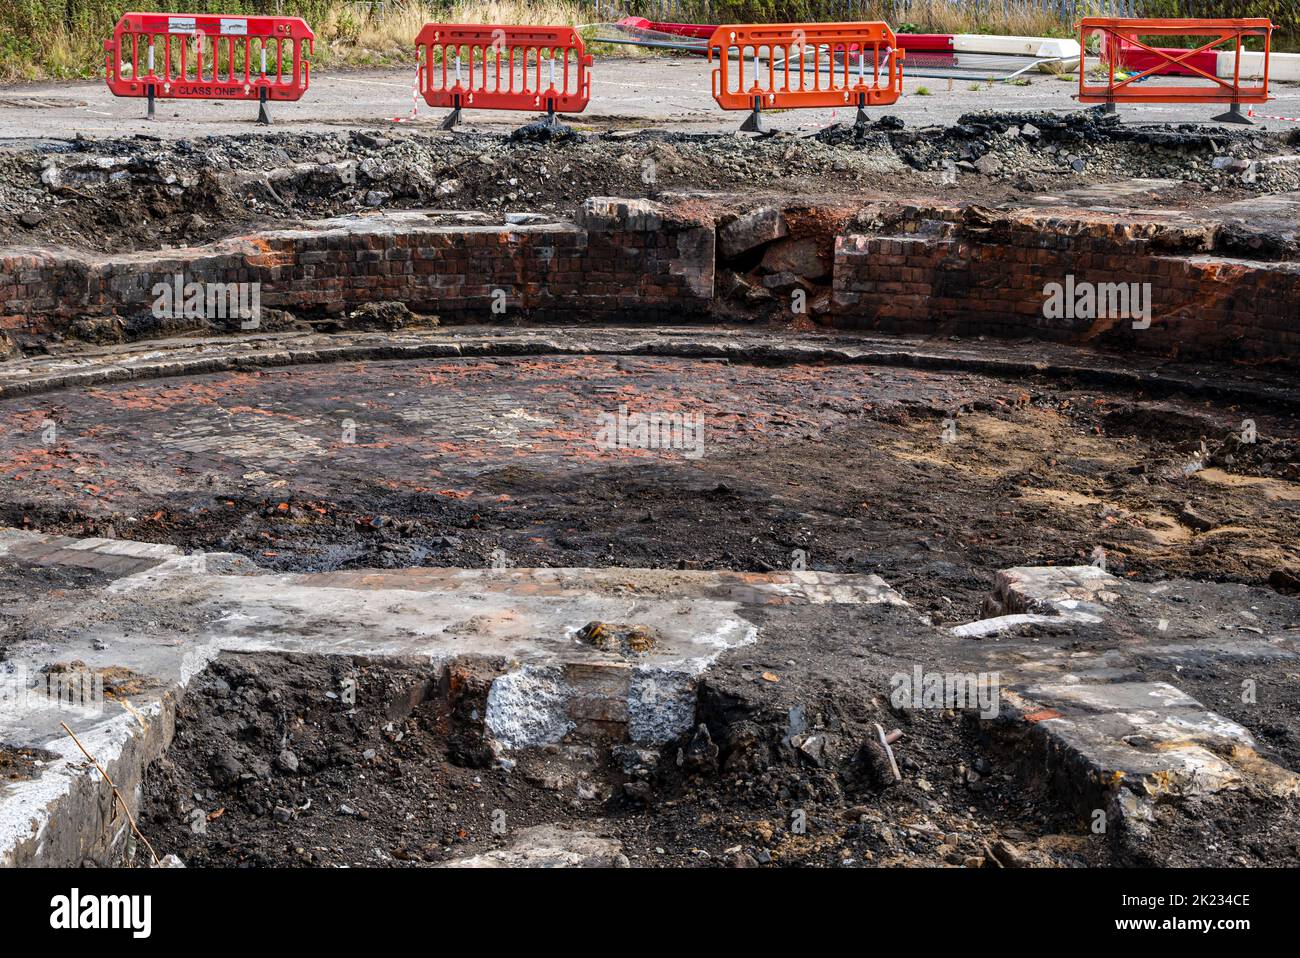 Unearthed remains of turntable, St Margaret's railway depot, Meadowbank, Edinburgh, Scotland, UK Stock Photo